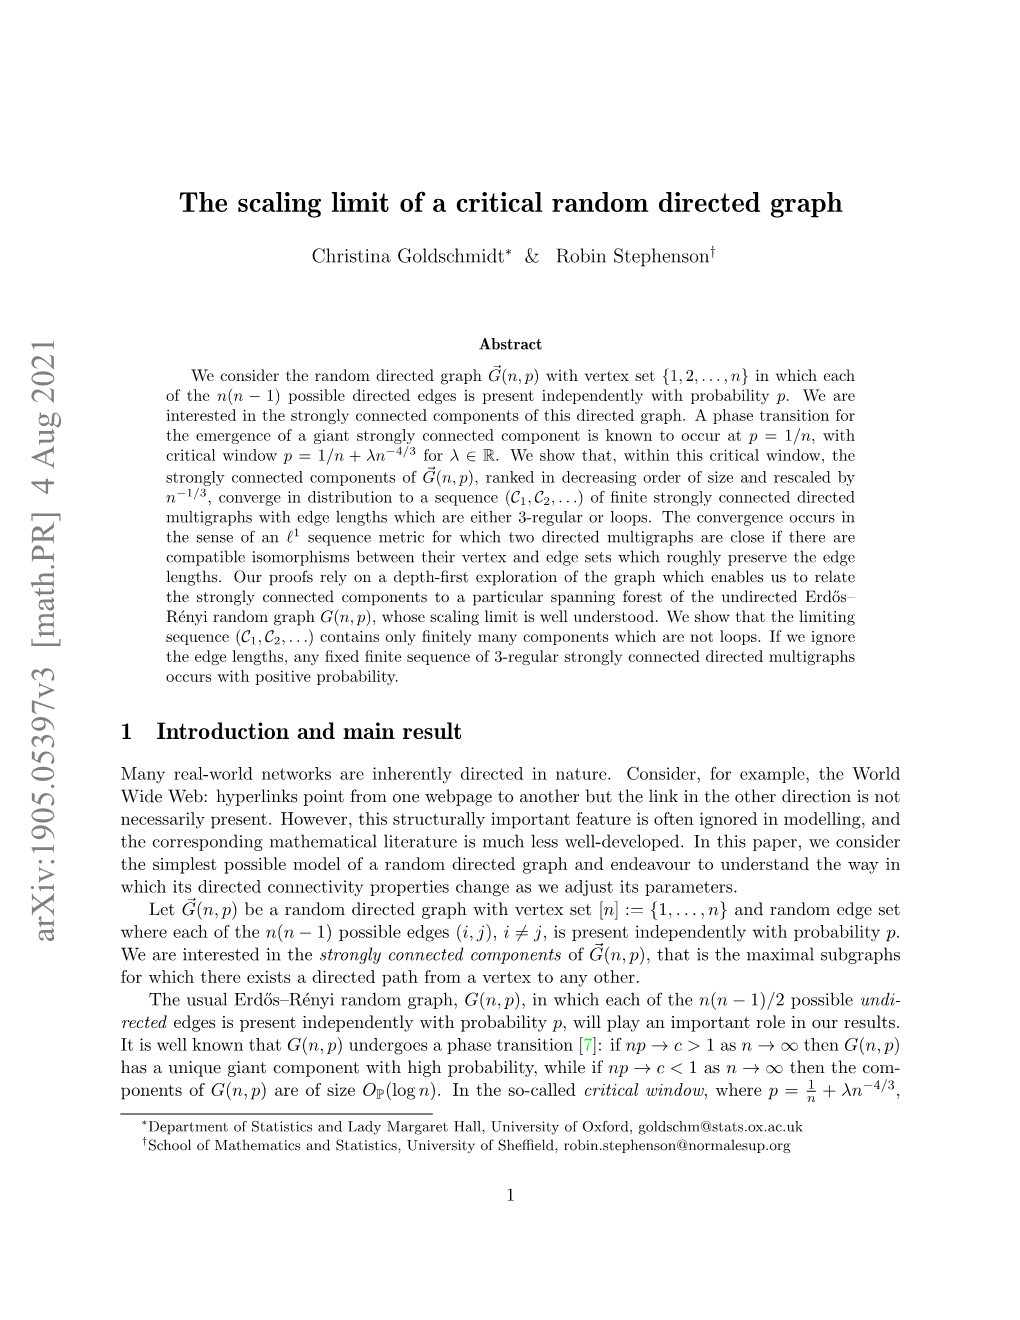 The Scaling Limit of a Critical Random Directed Graph